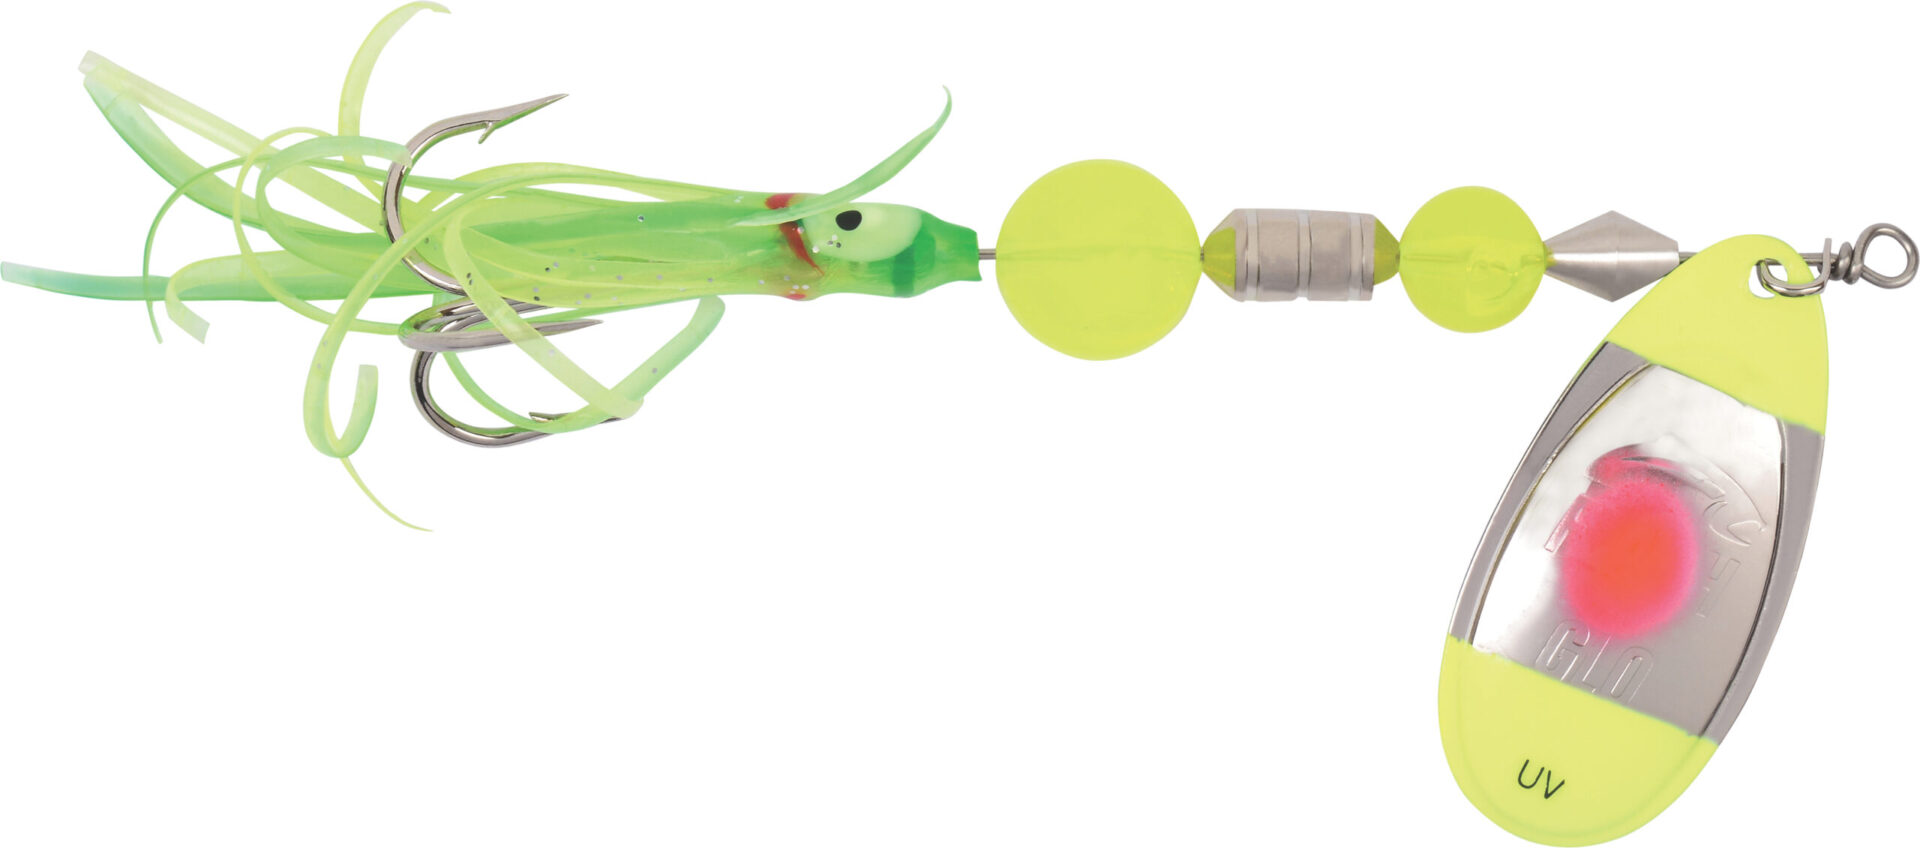 https://www.yakimabait.com/wp-content/uploads/2015/02/products-FLASH-GLO-UV-SQUID-SPINNER-CASTING-SUNS-scaled.jpg